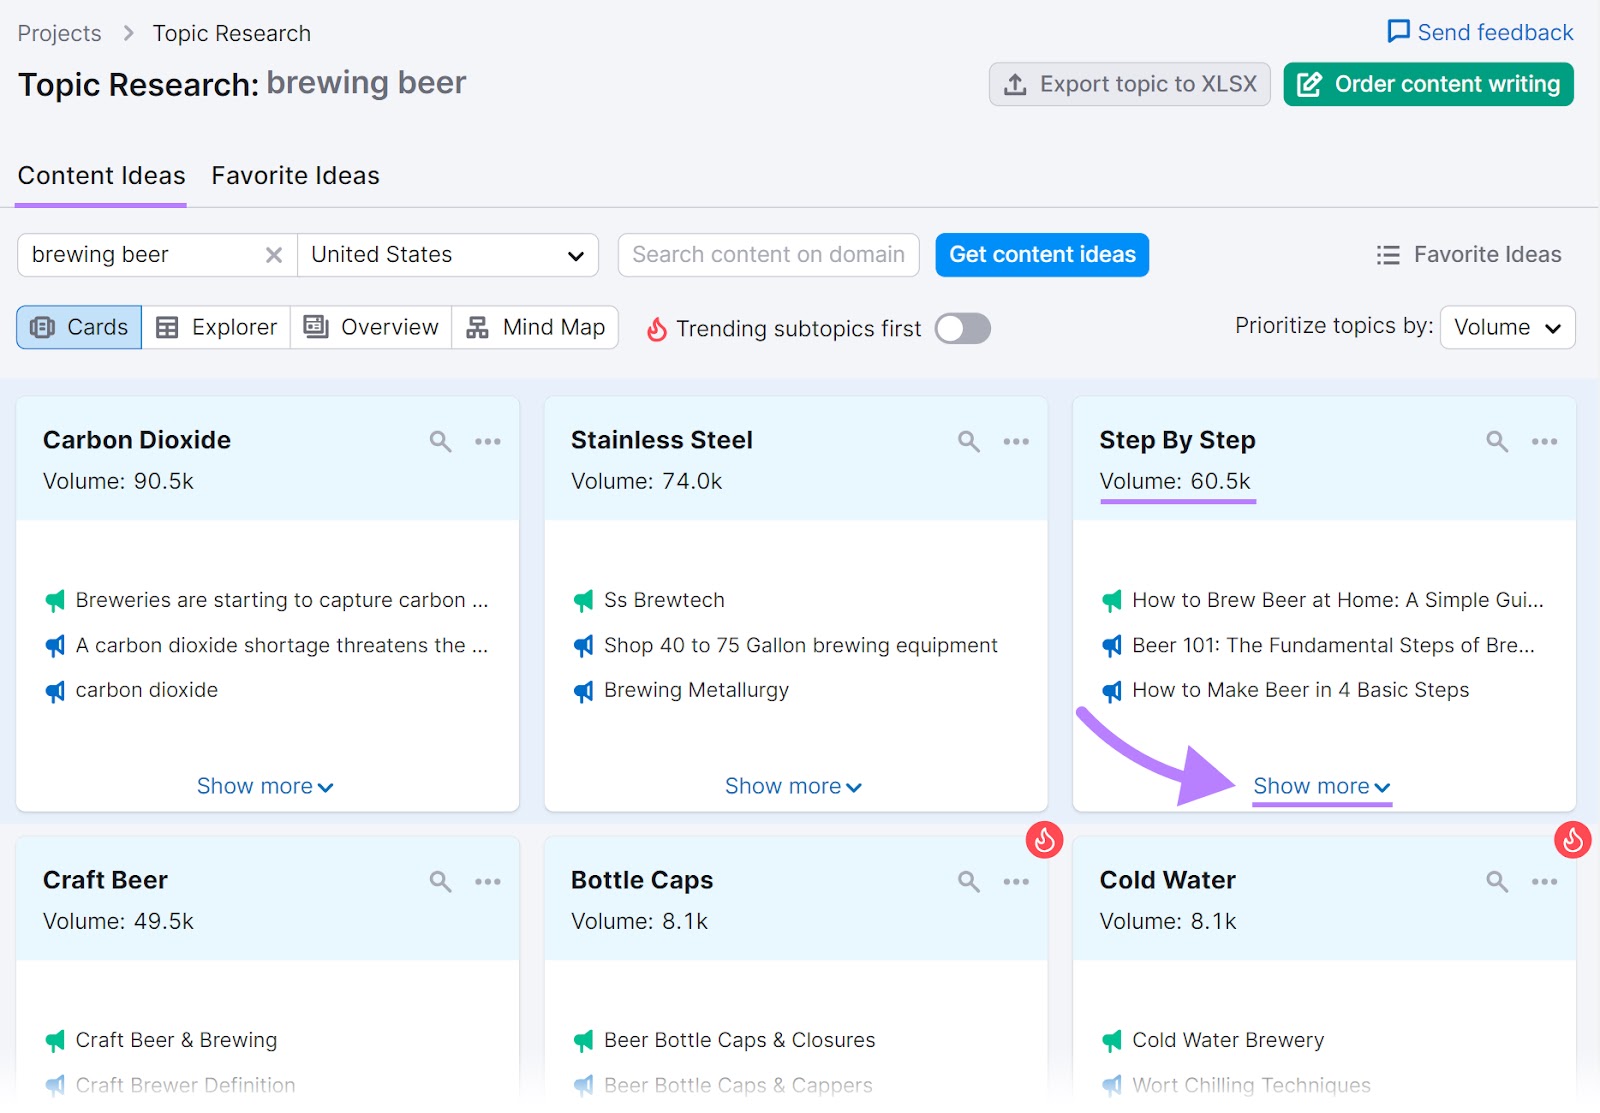 "Content Ideas" dashboard for "brewing beer" successful  Topic Research tool